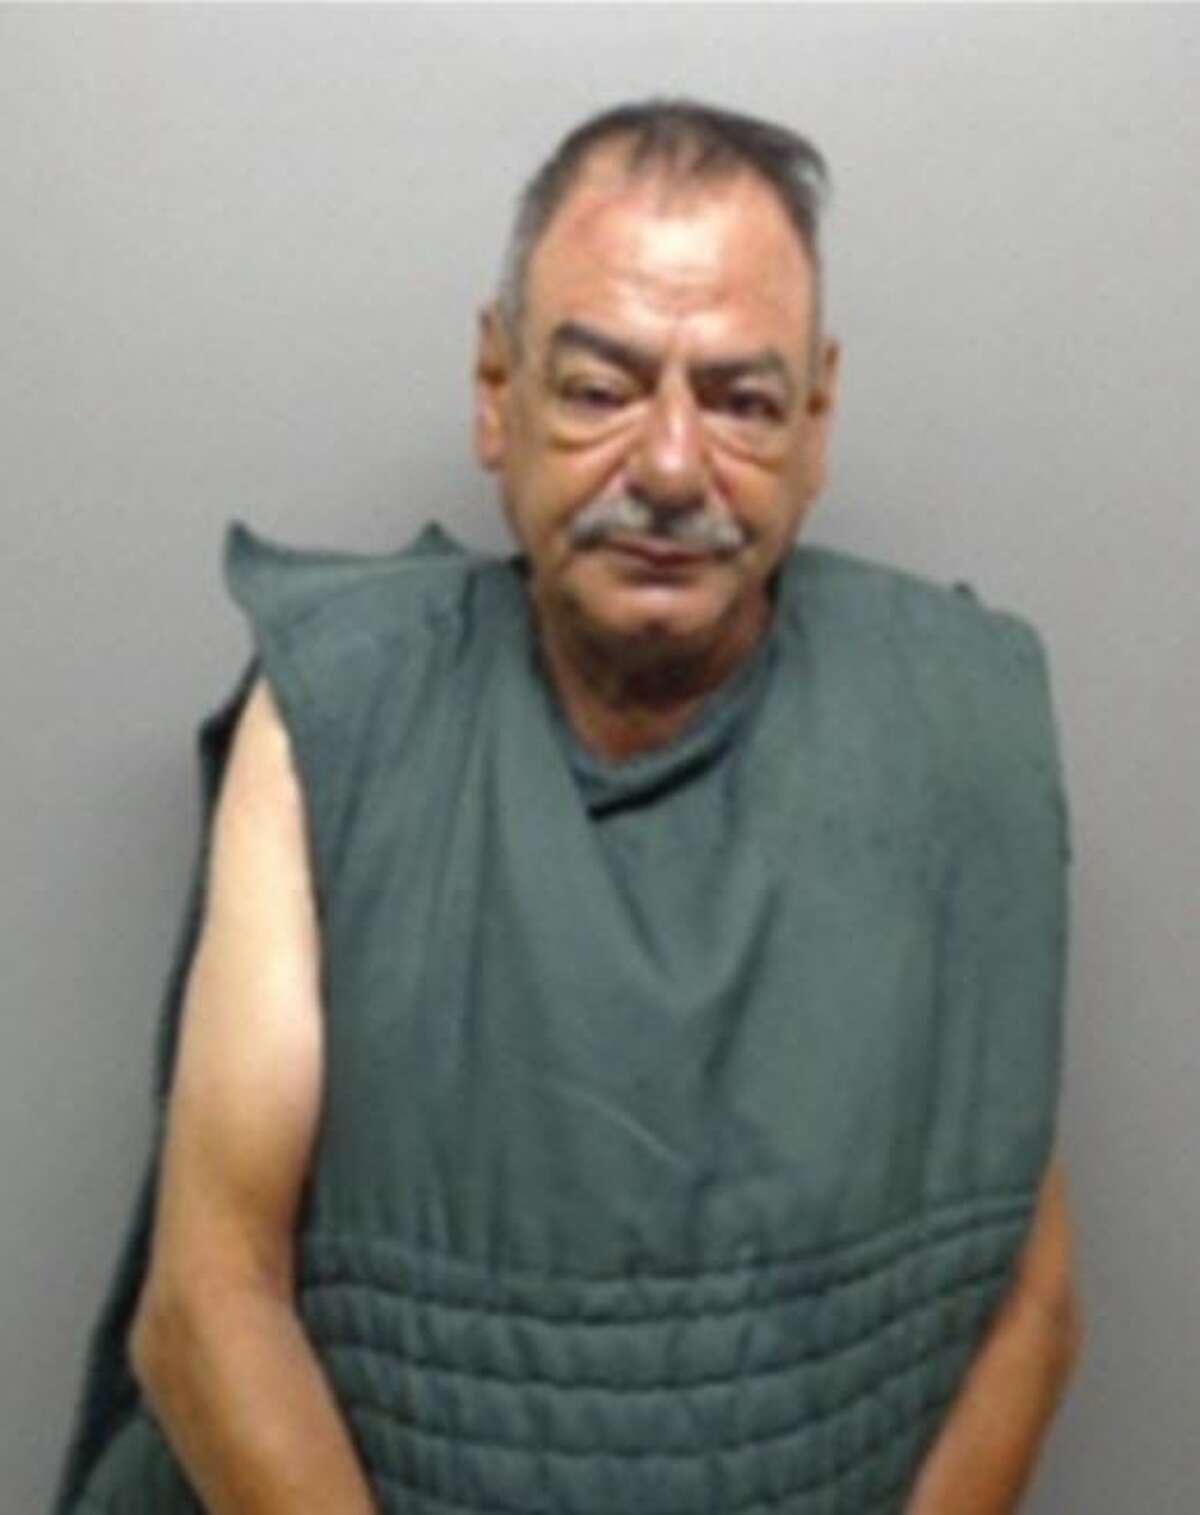 Jose Maria Sanchez, 64, was charged with assault, family violence and injury to an elderly person.